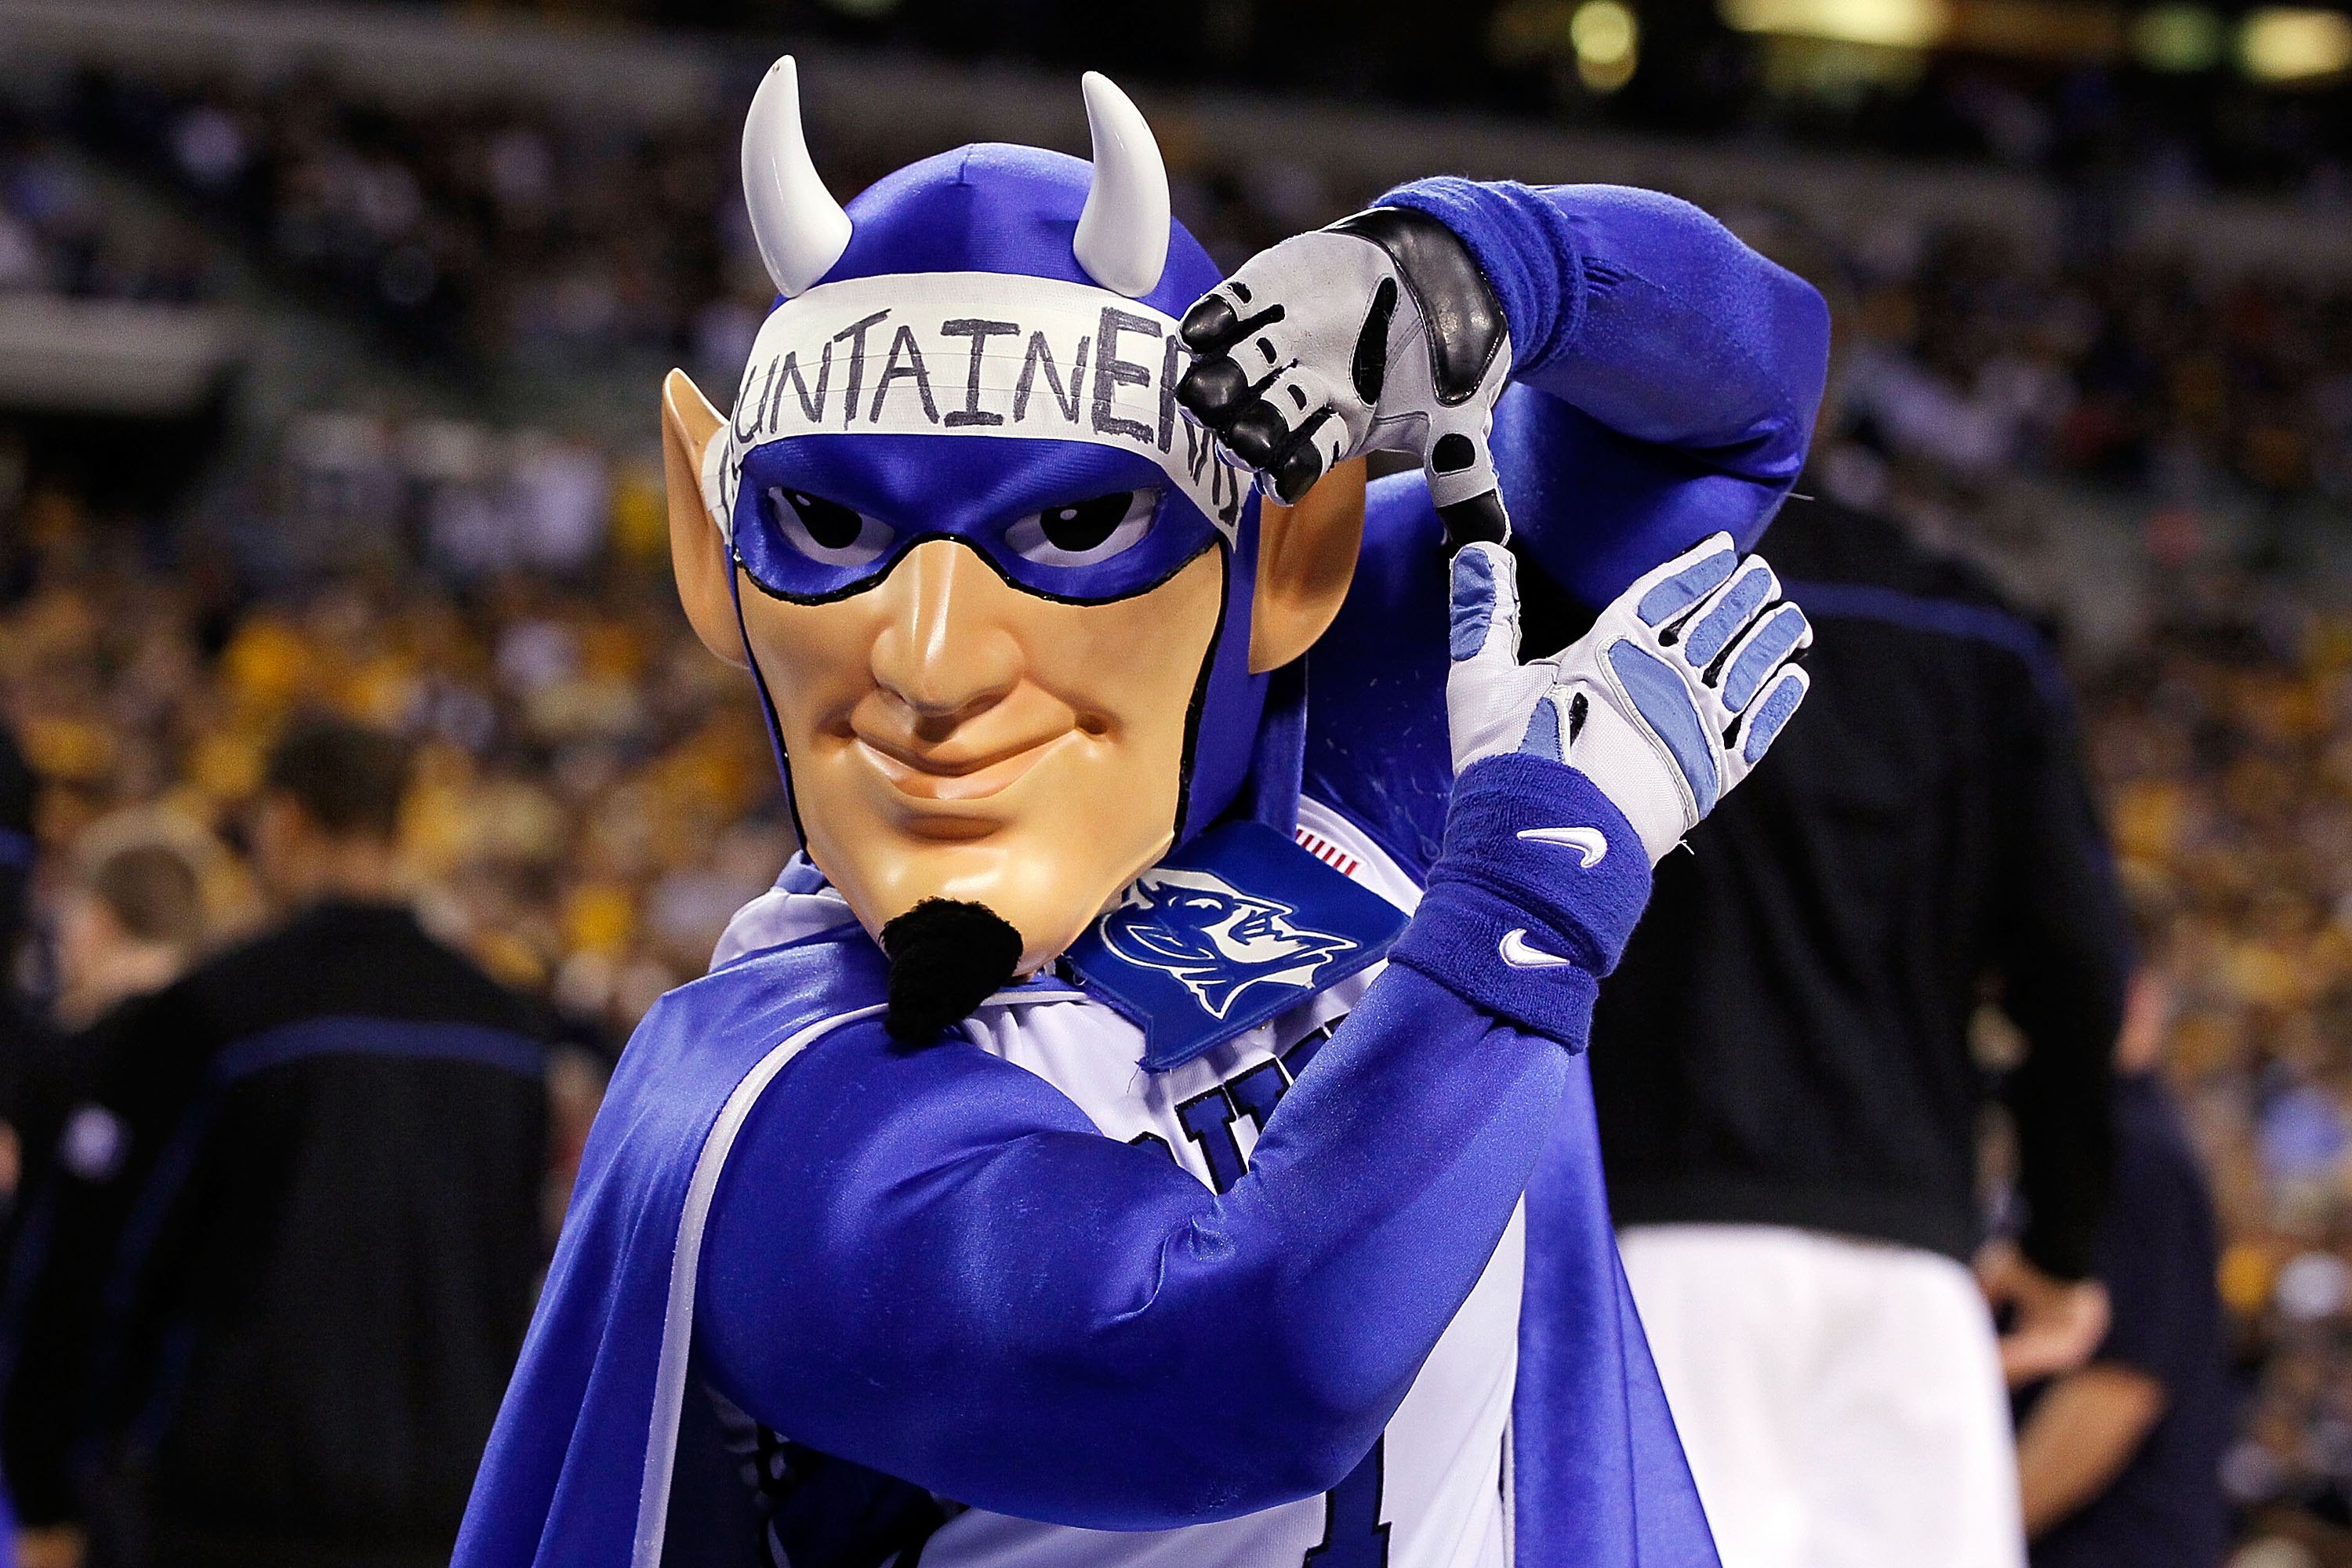 College Football Mascots List 11 Colleges That Changed Their Mascots